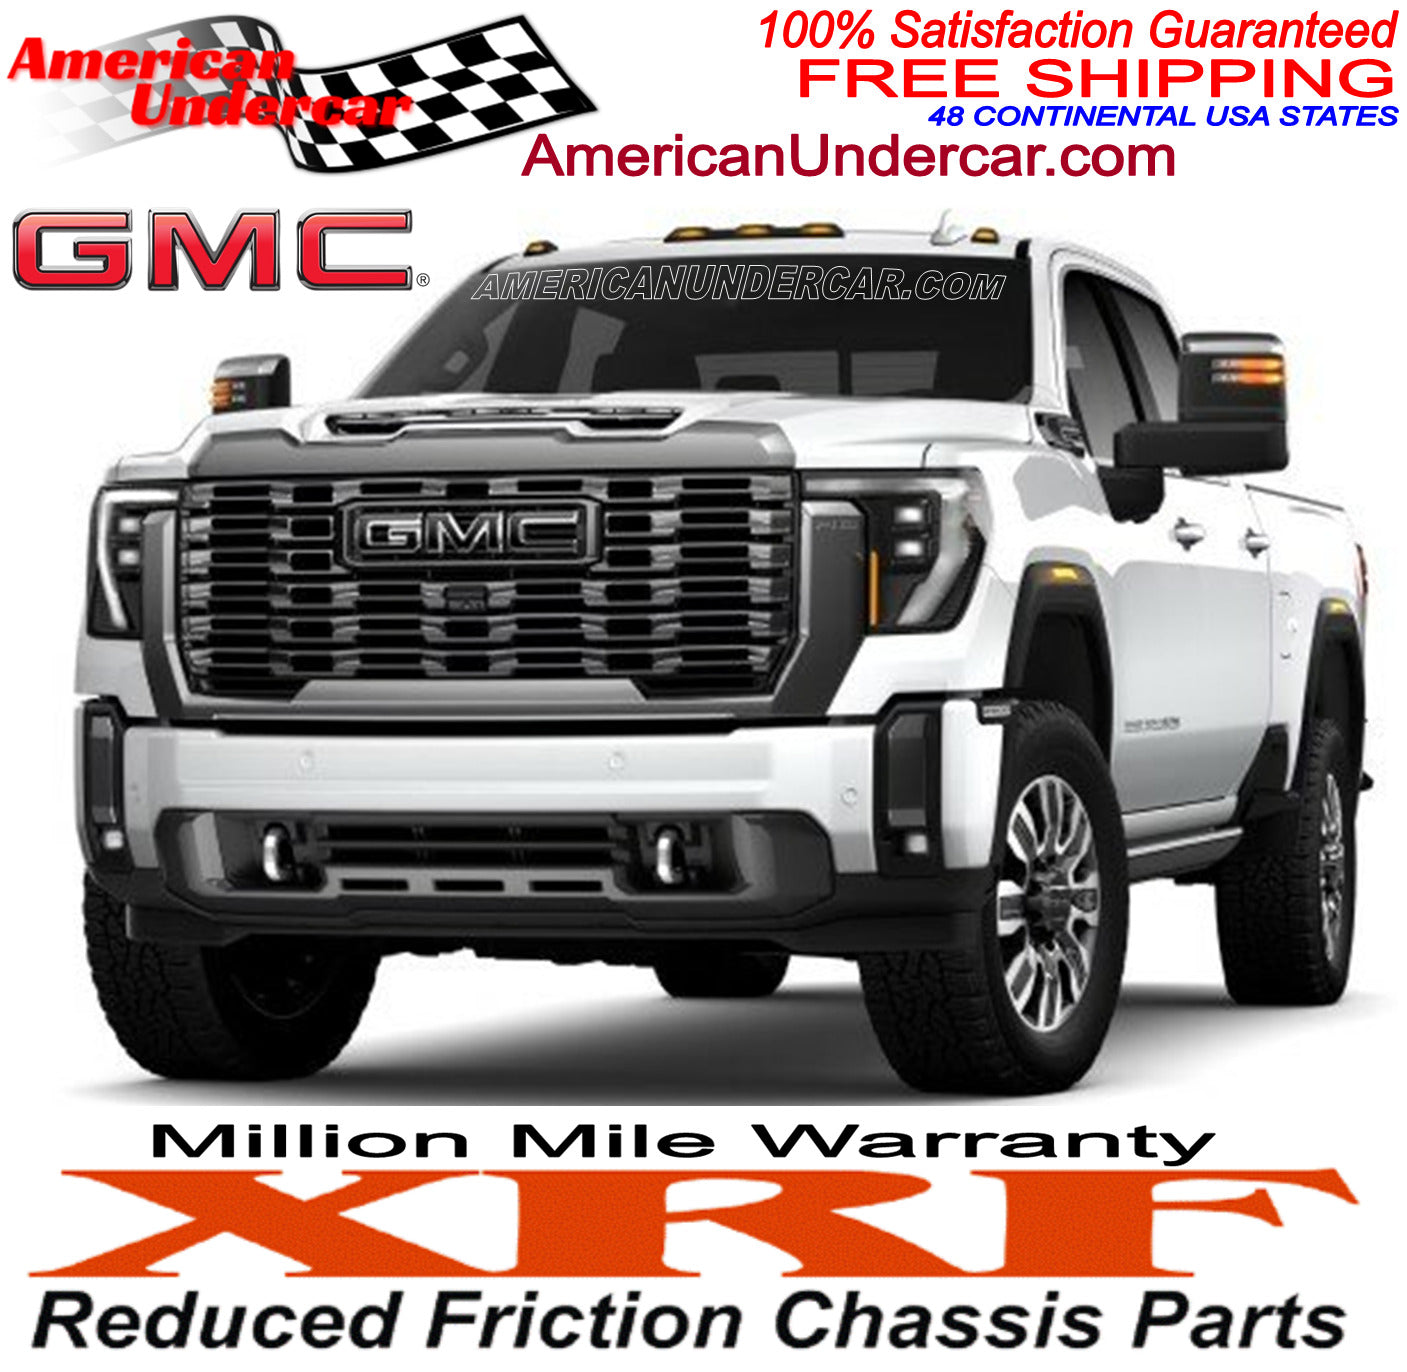 XRF Steering and Suspension Kit for 2011-2019 GMC Sierra 3500HD 2WD